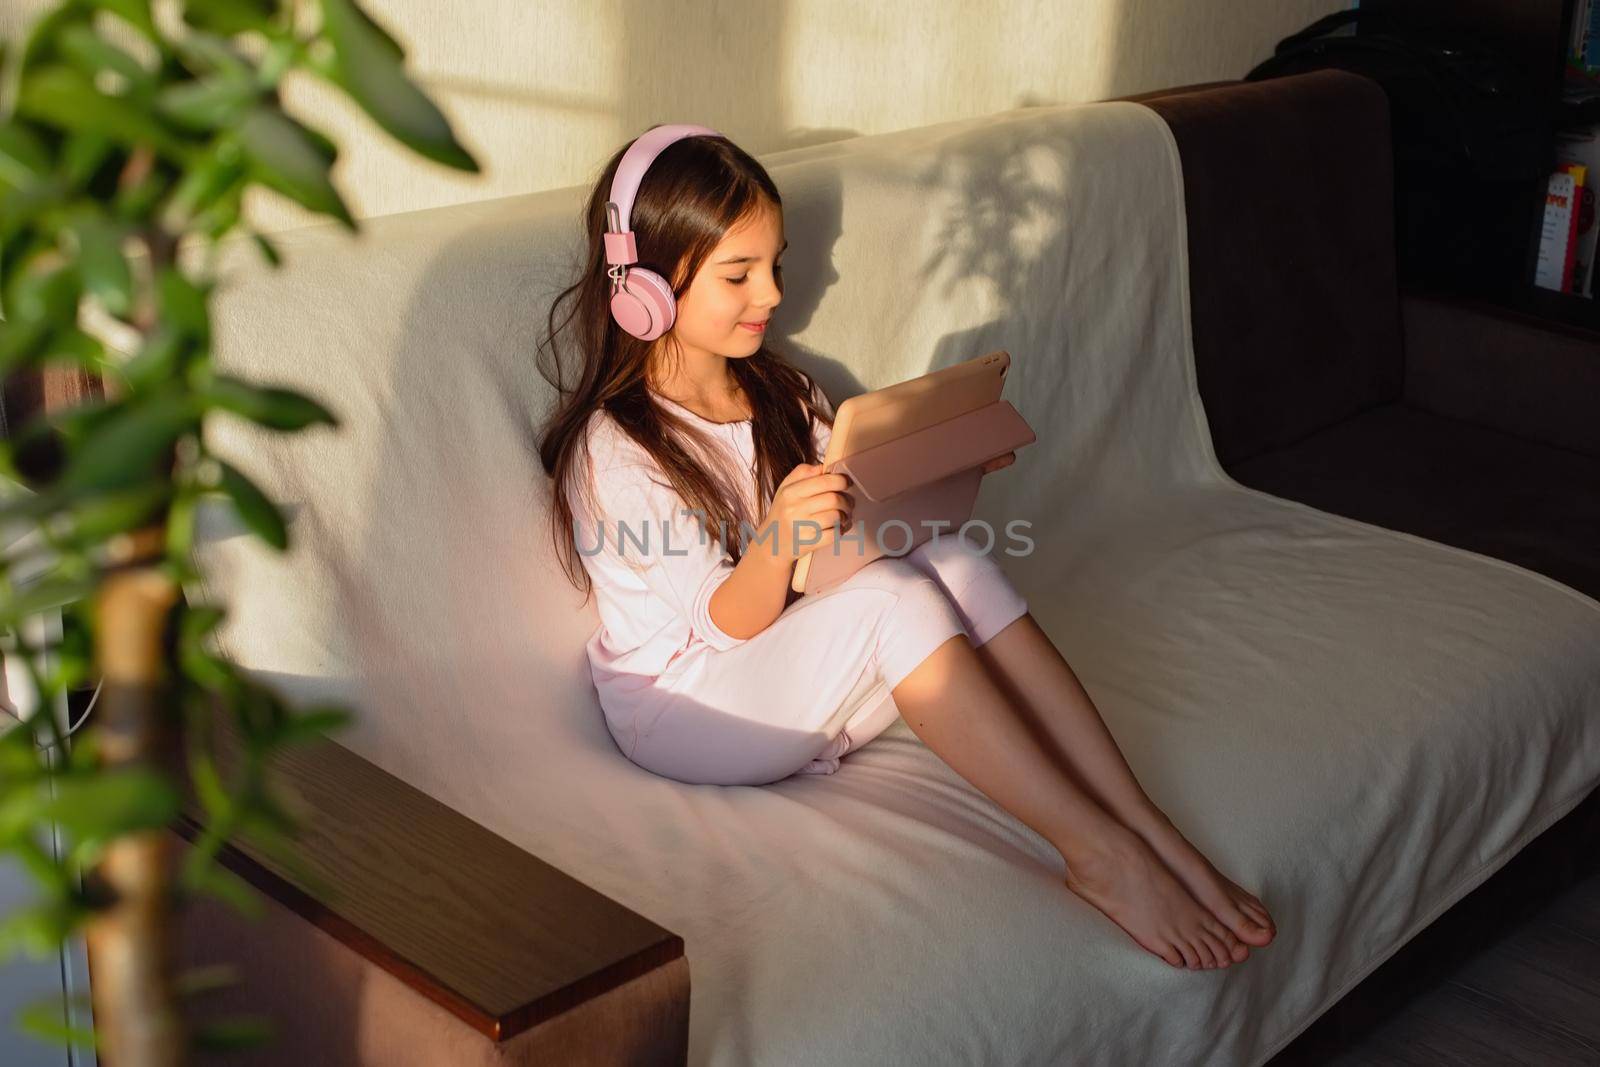 A little beautiful girl in pink home clothes and pink headphones sits on the couch, looks into a digital tablet.